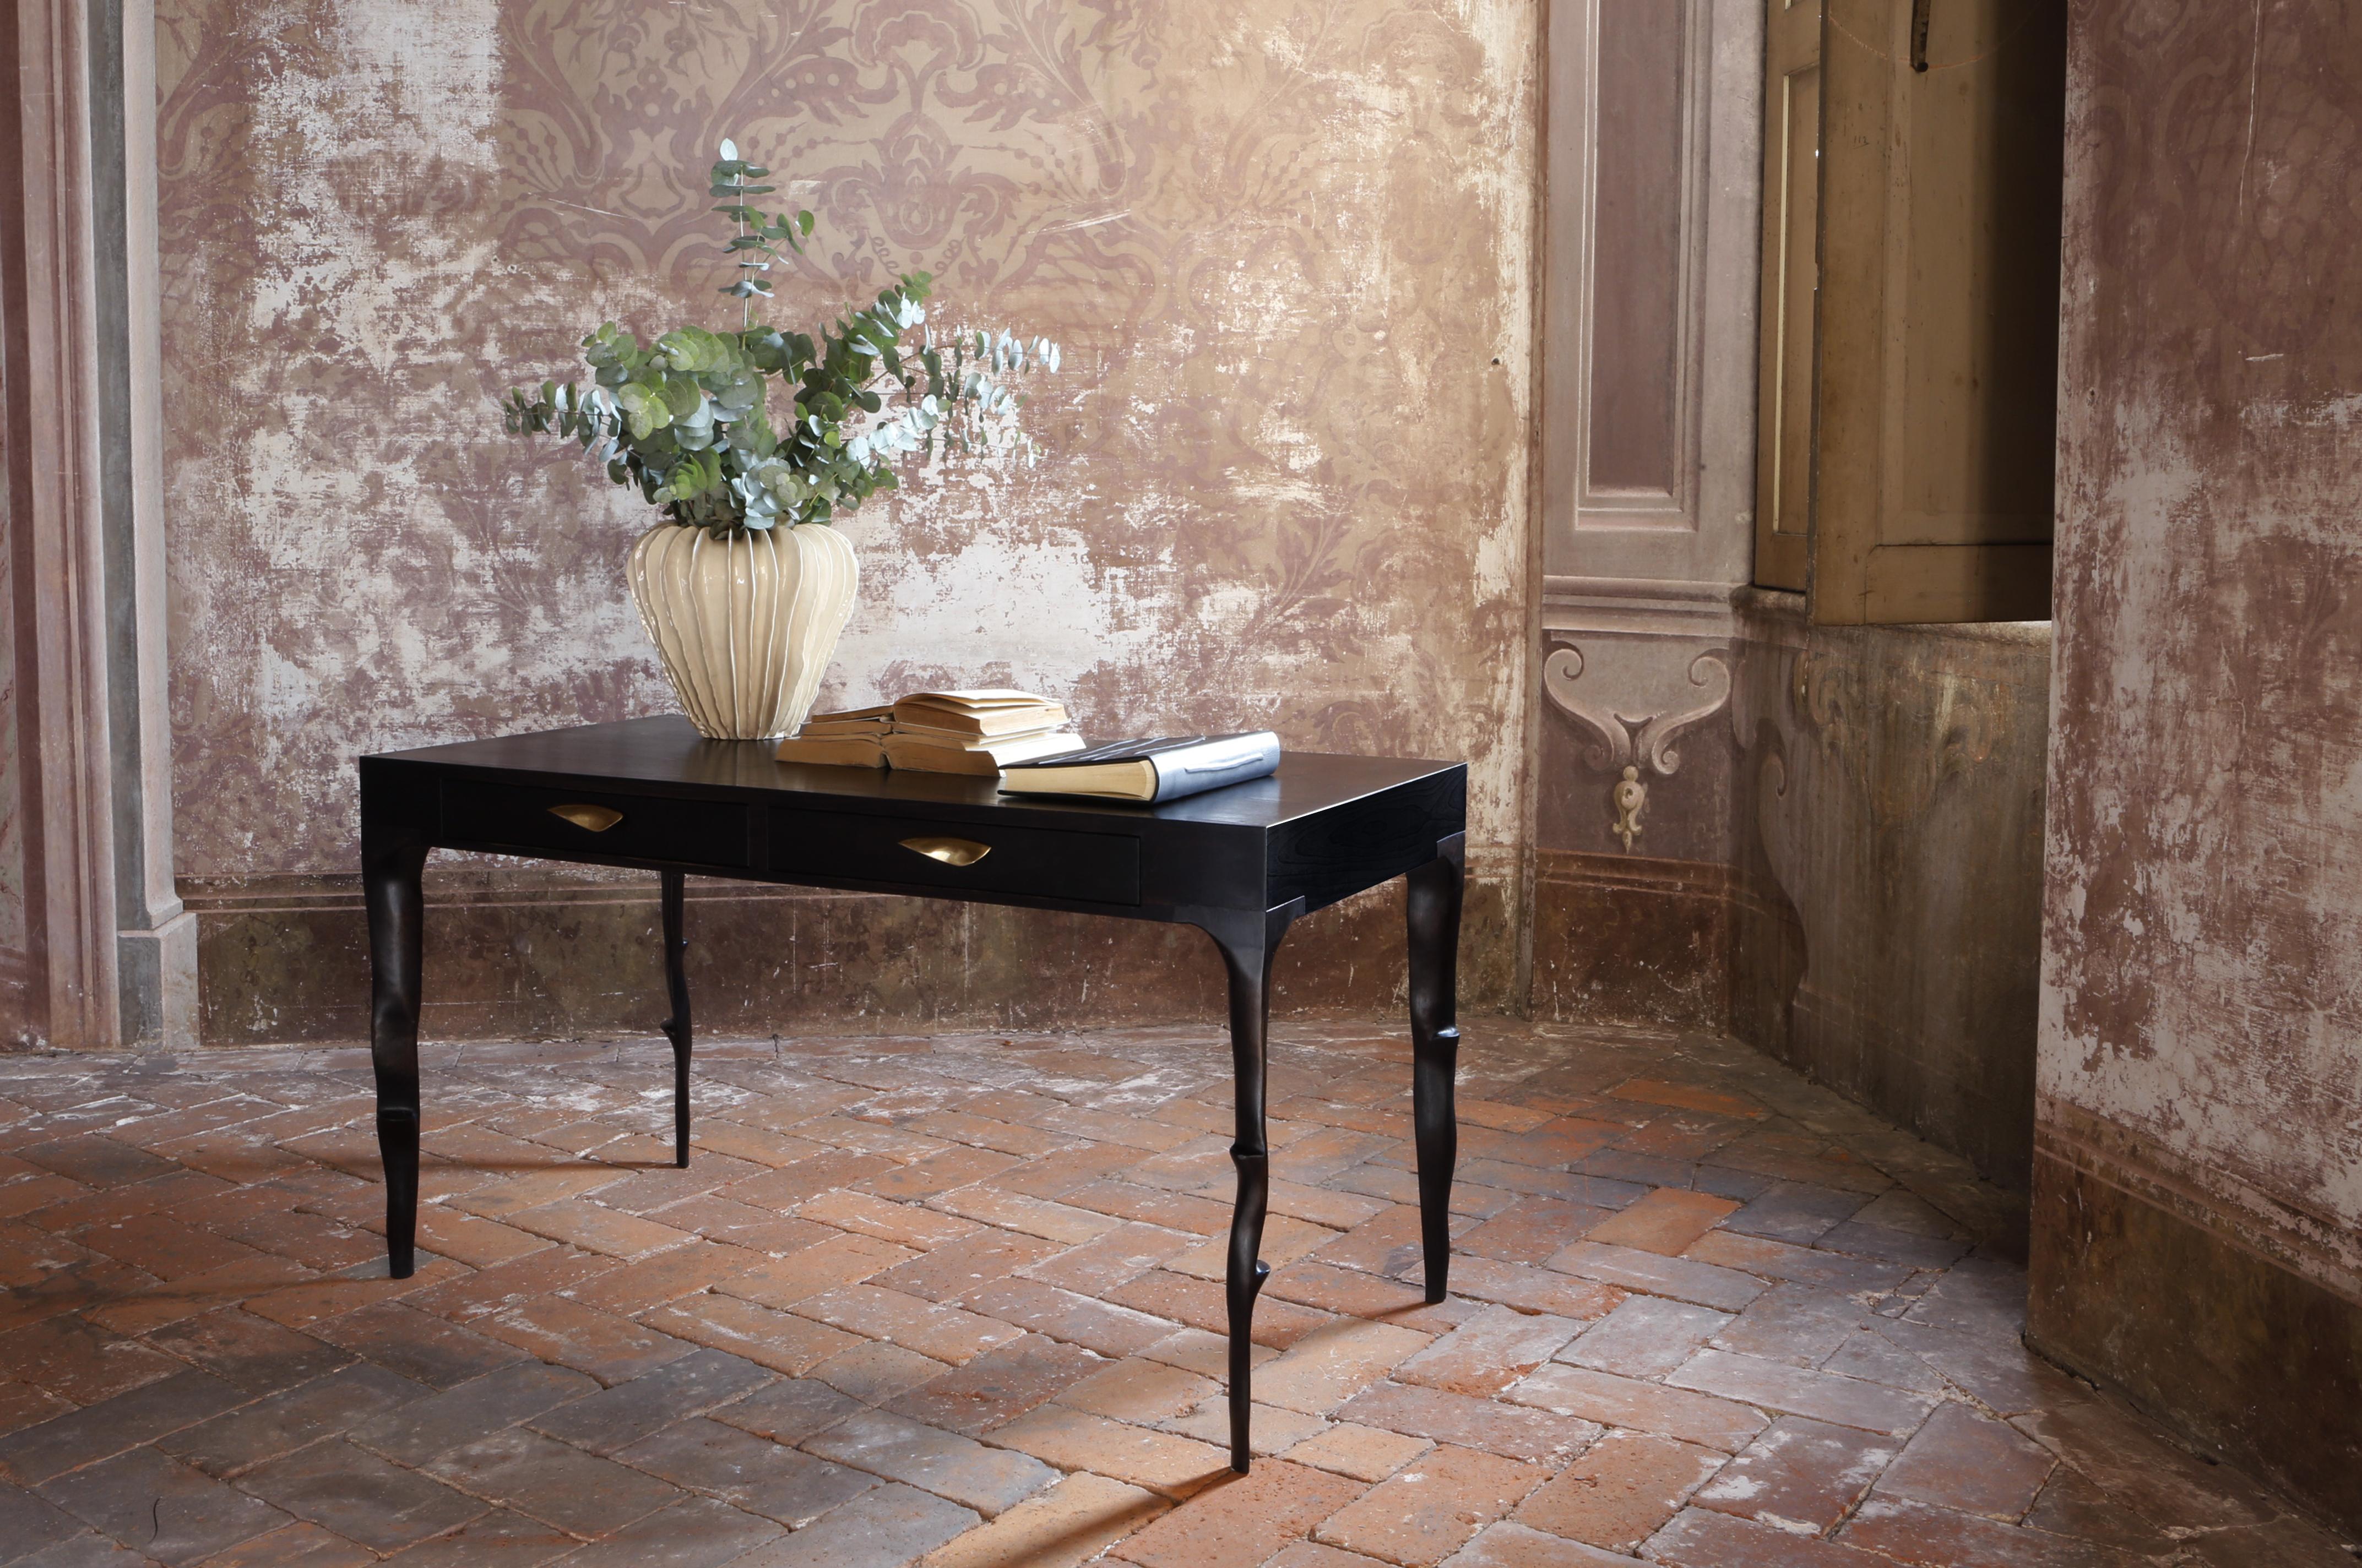 Characterized by clean shapes and linear design, this striking writing desk rests on elegant branch-shaped legs that add a sense of movement to the piece fully handcrafted by Italian master carpenters employing a variety of European and exotic woods